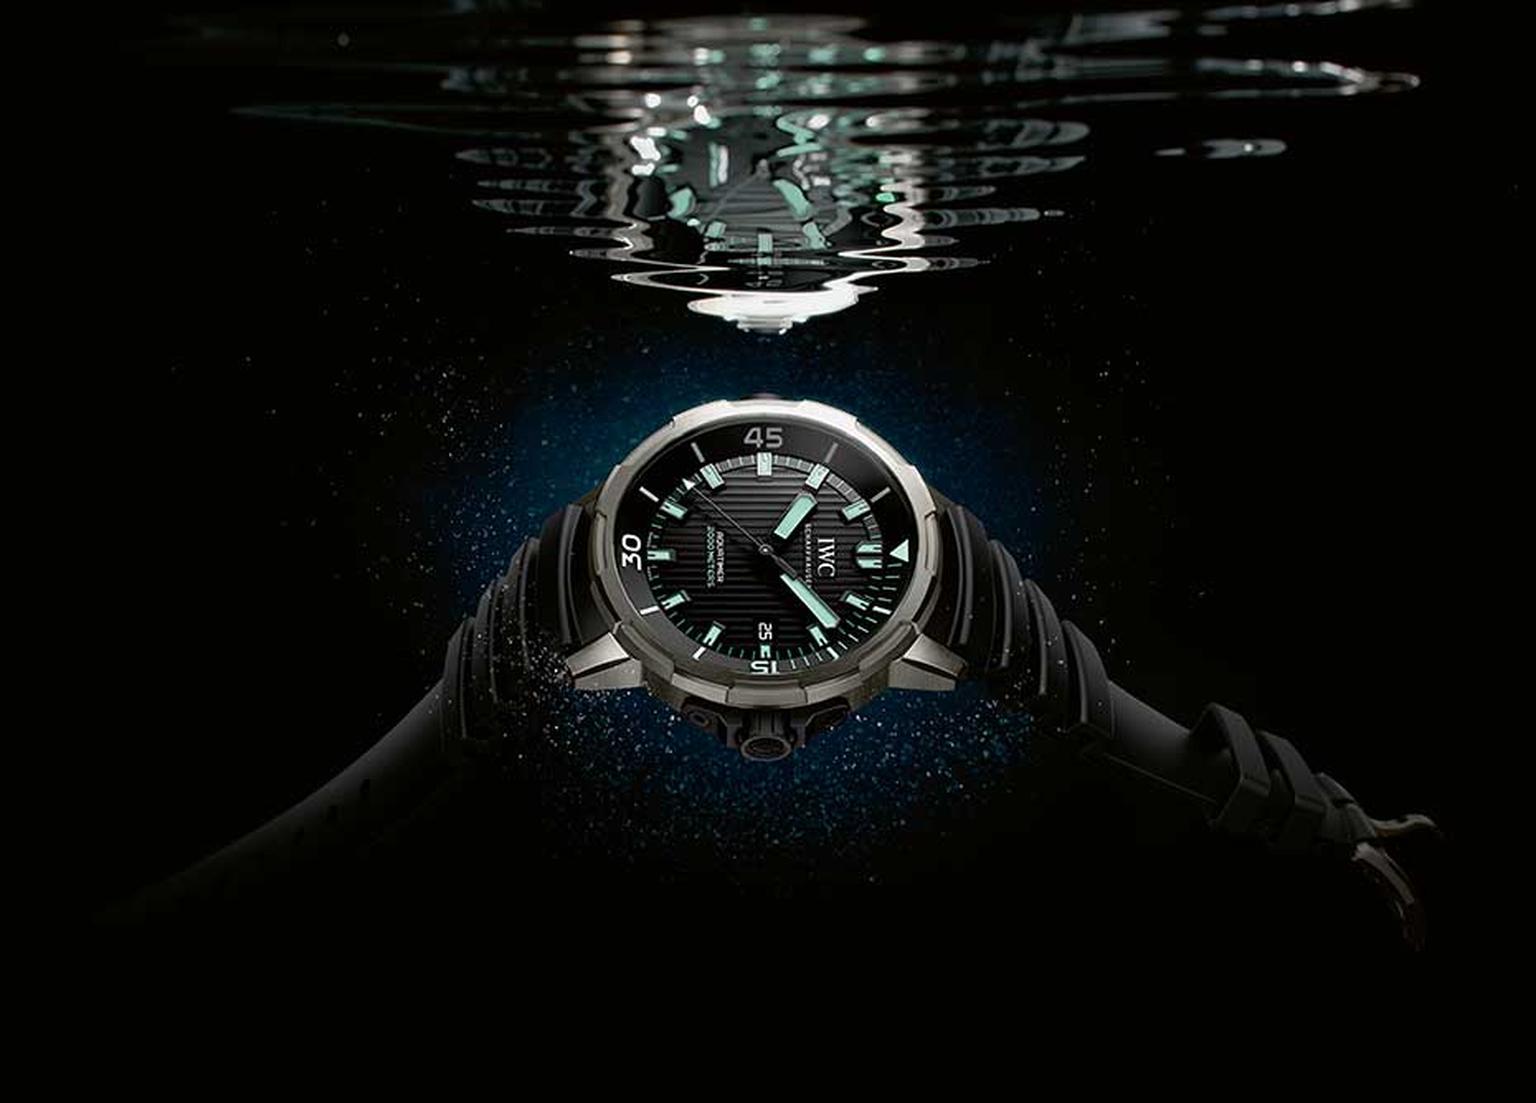 IWC's new Aquatimer 2000 can be used 2,000m beneath the sea - a watch that appeals to not only professional divers but also ambitious amateur ocean explorers.